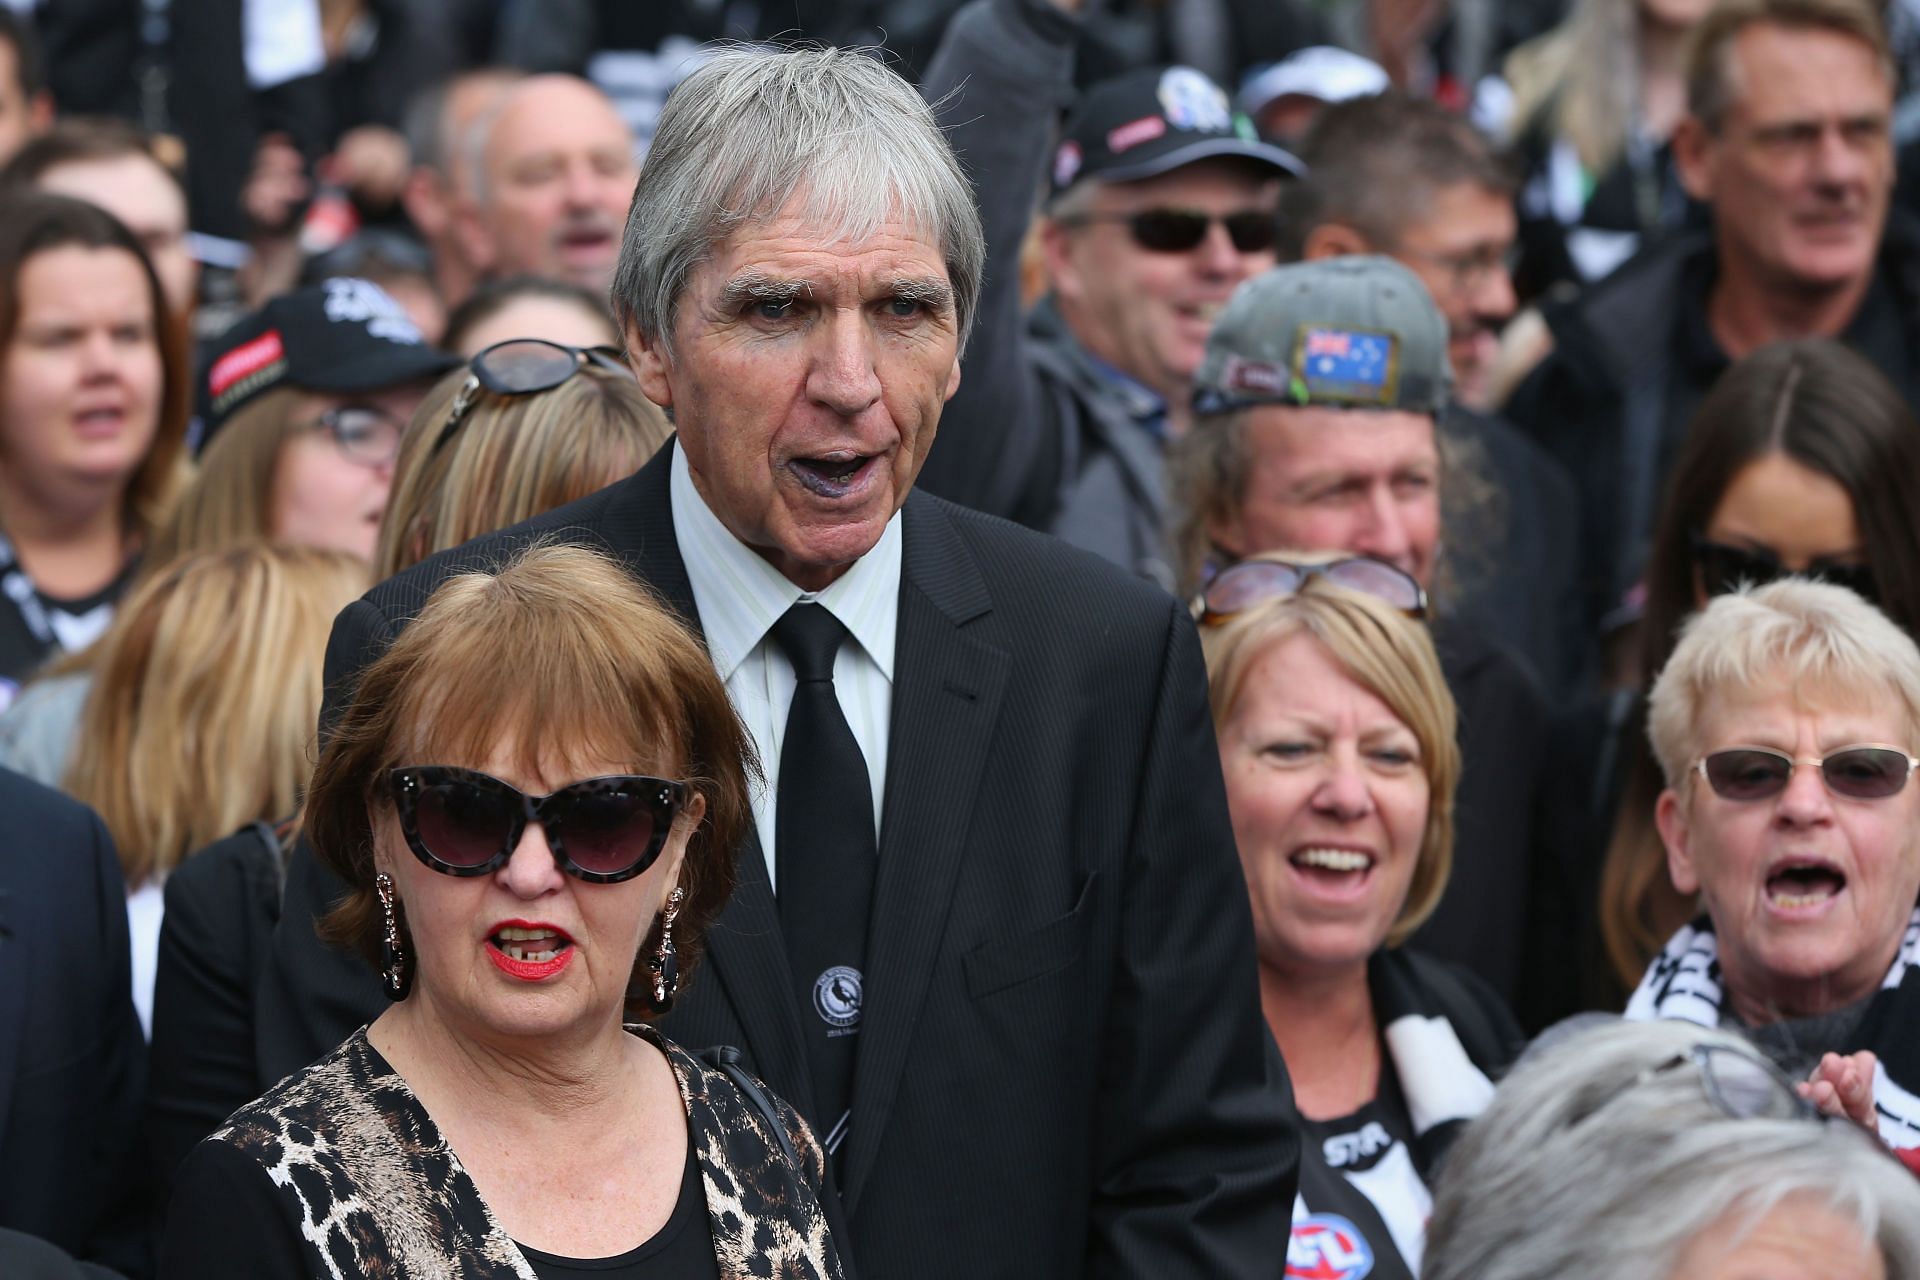 Magpies legend Peter McKenna sings the club song with Magpies fans as they march together for their 125-year celebrations